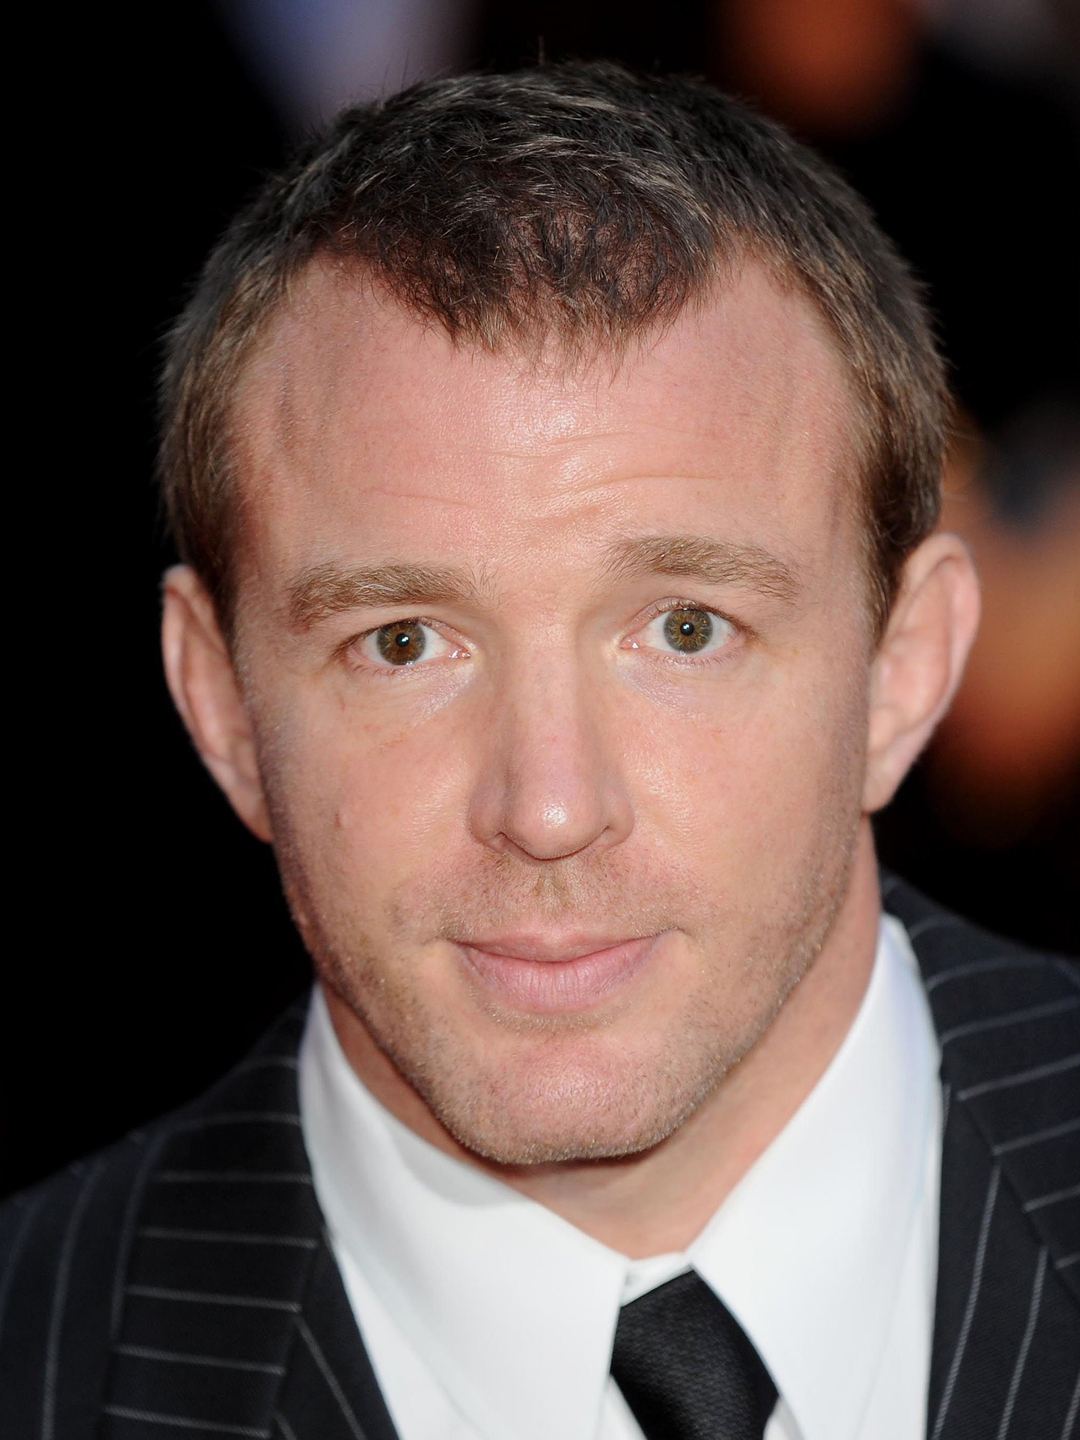 Guy Ritchie story of success